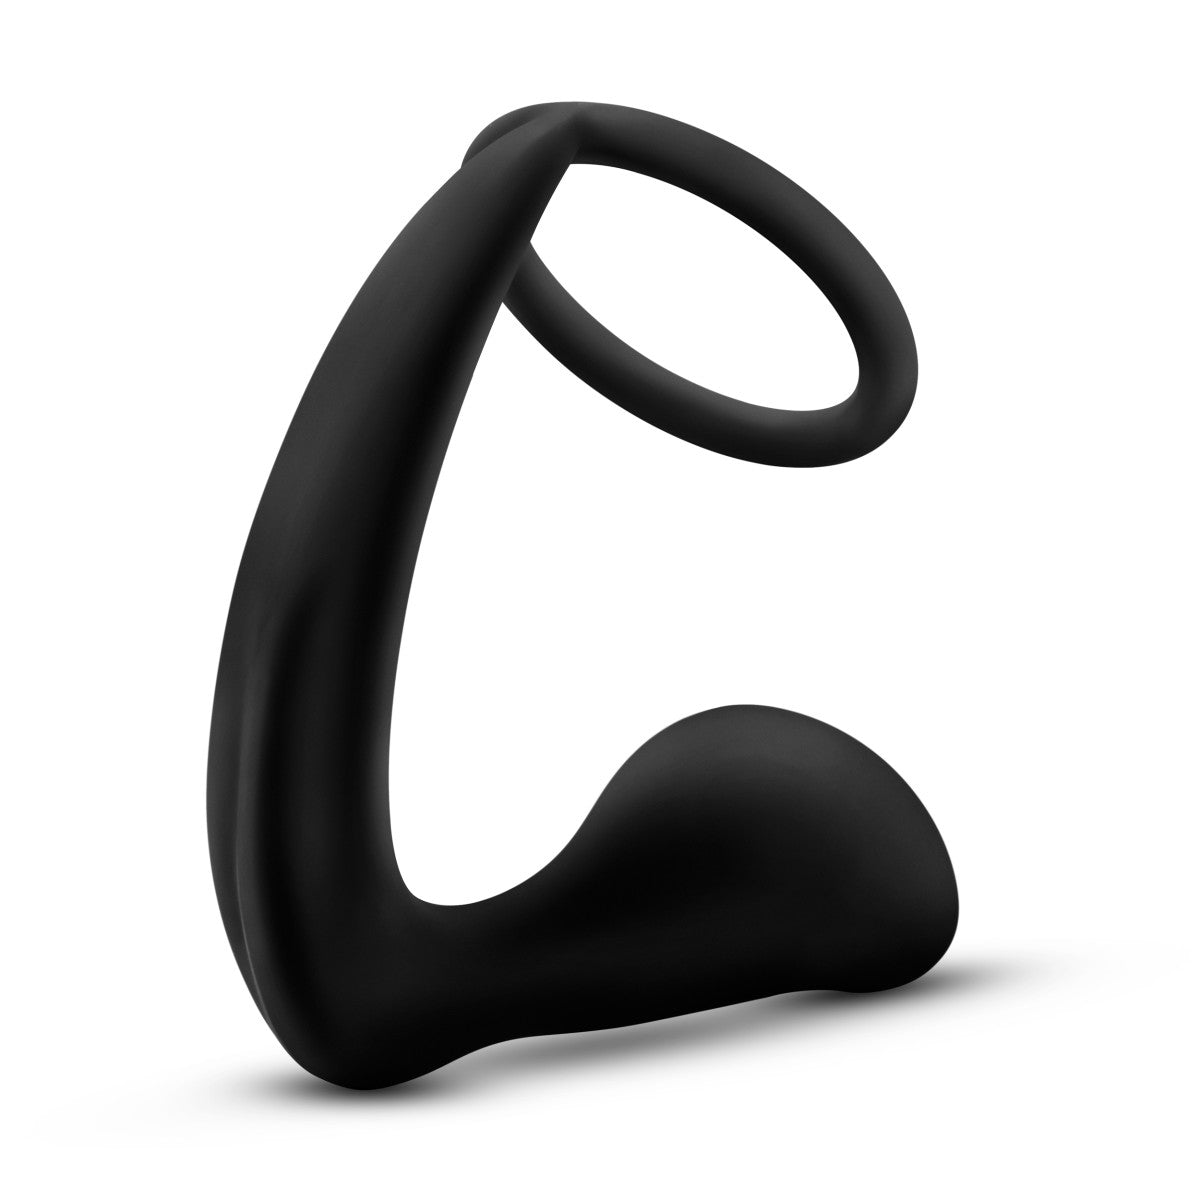 
Black cock ring and plug in one. Thin O ring is connected to a plug with a tapered bulbous tip for prostate stimulation. Additional images show alternate angles and highlight features as listed in description and/or bullet points. Screen reader support enabled.
